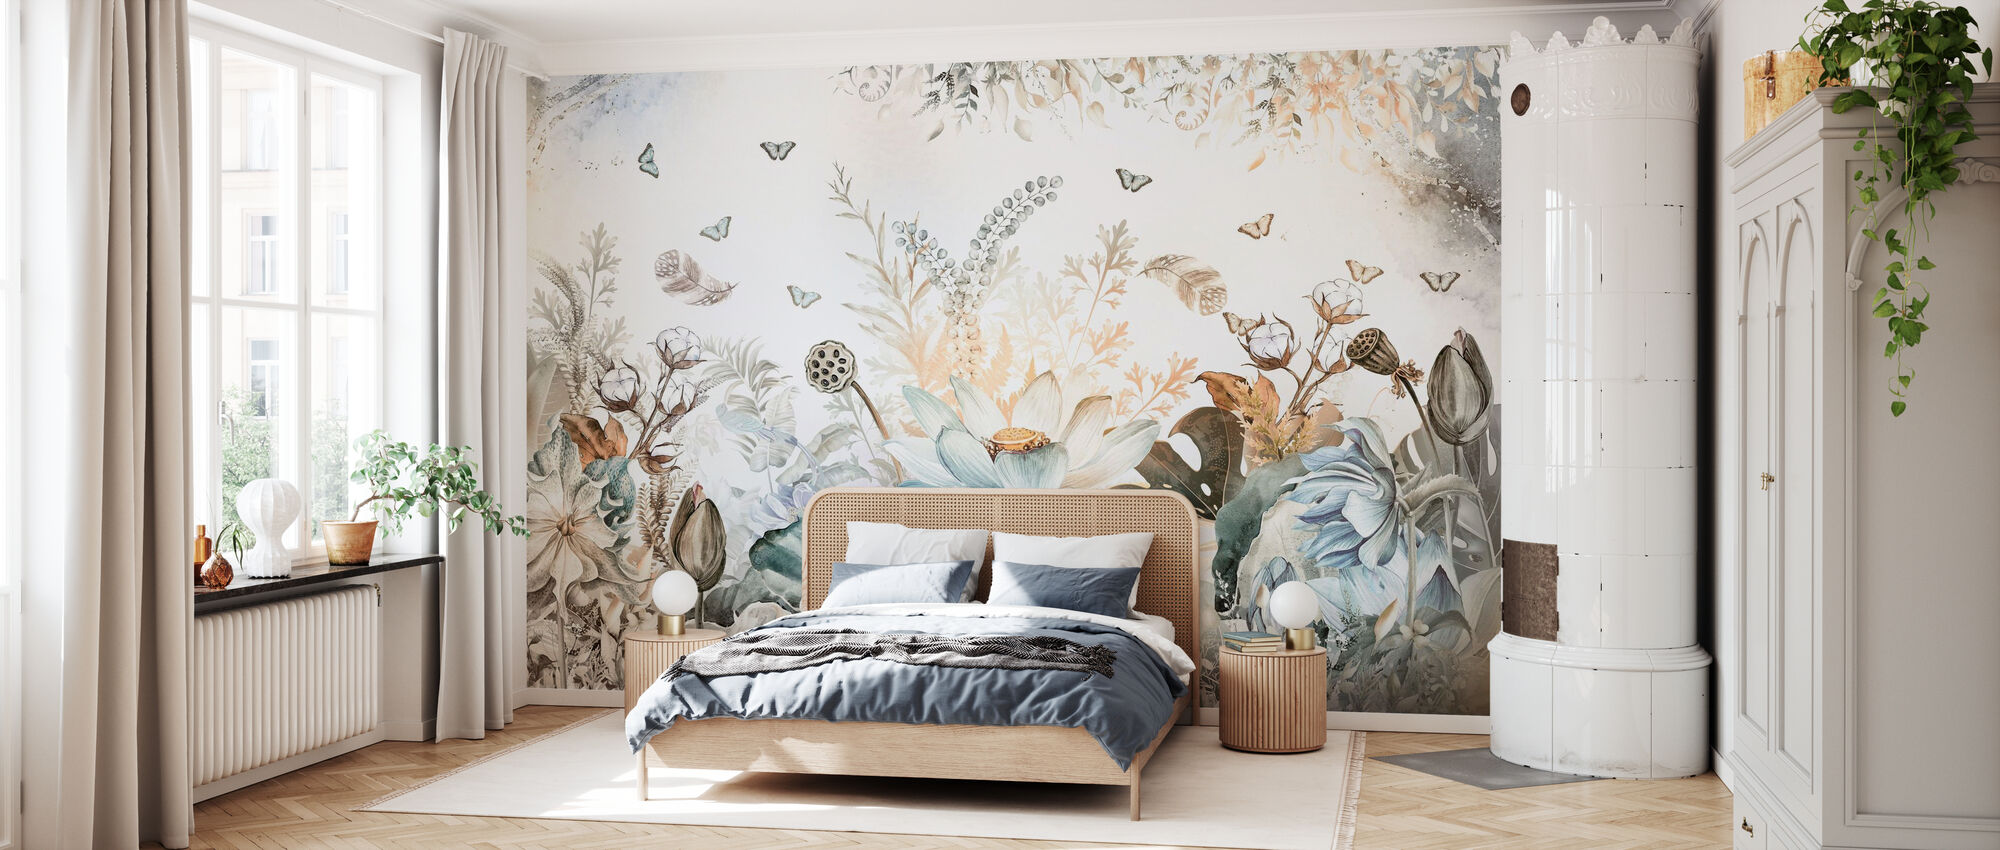 21 fabulous spring-inspired wallpapers - Beautiful Blossom wall mural / wallpaper